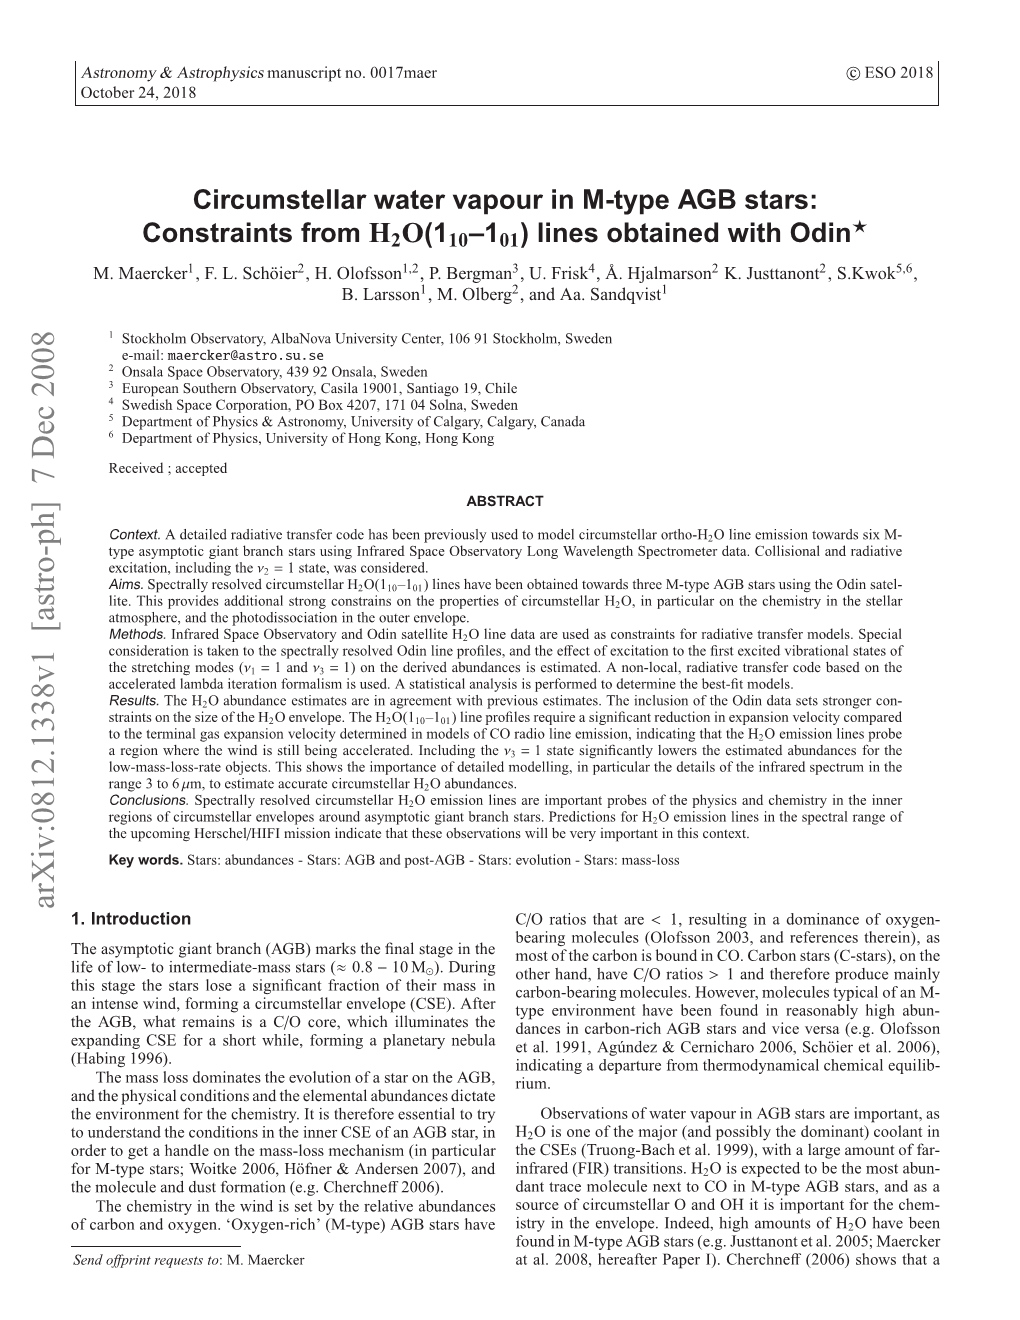 Circumstellar Water Vapour in M-Type AGB Stars: Constraints from H2O